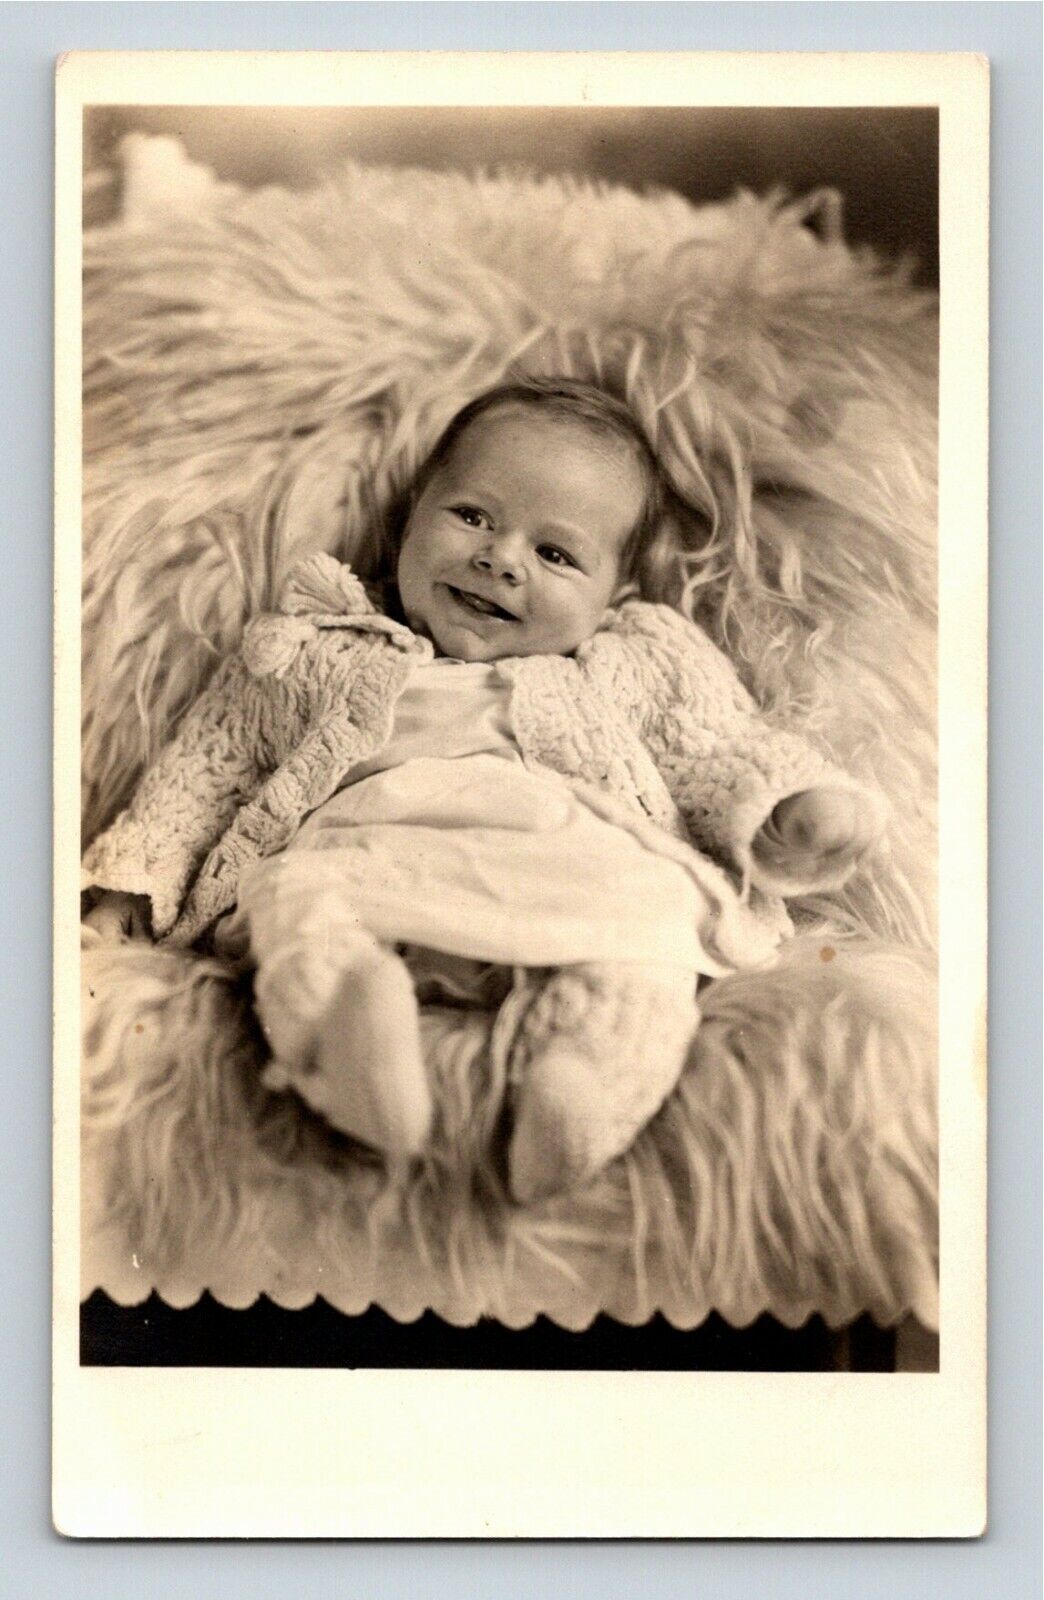 Cute Smiling Baby in Knitted Sweater Id\'d Dwain McIntosh RPPC